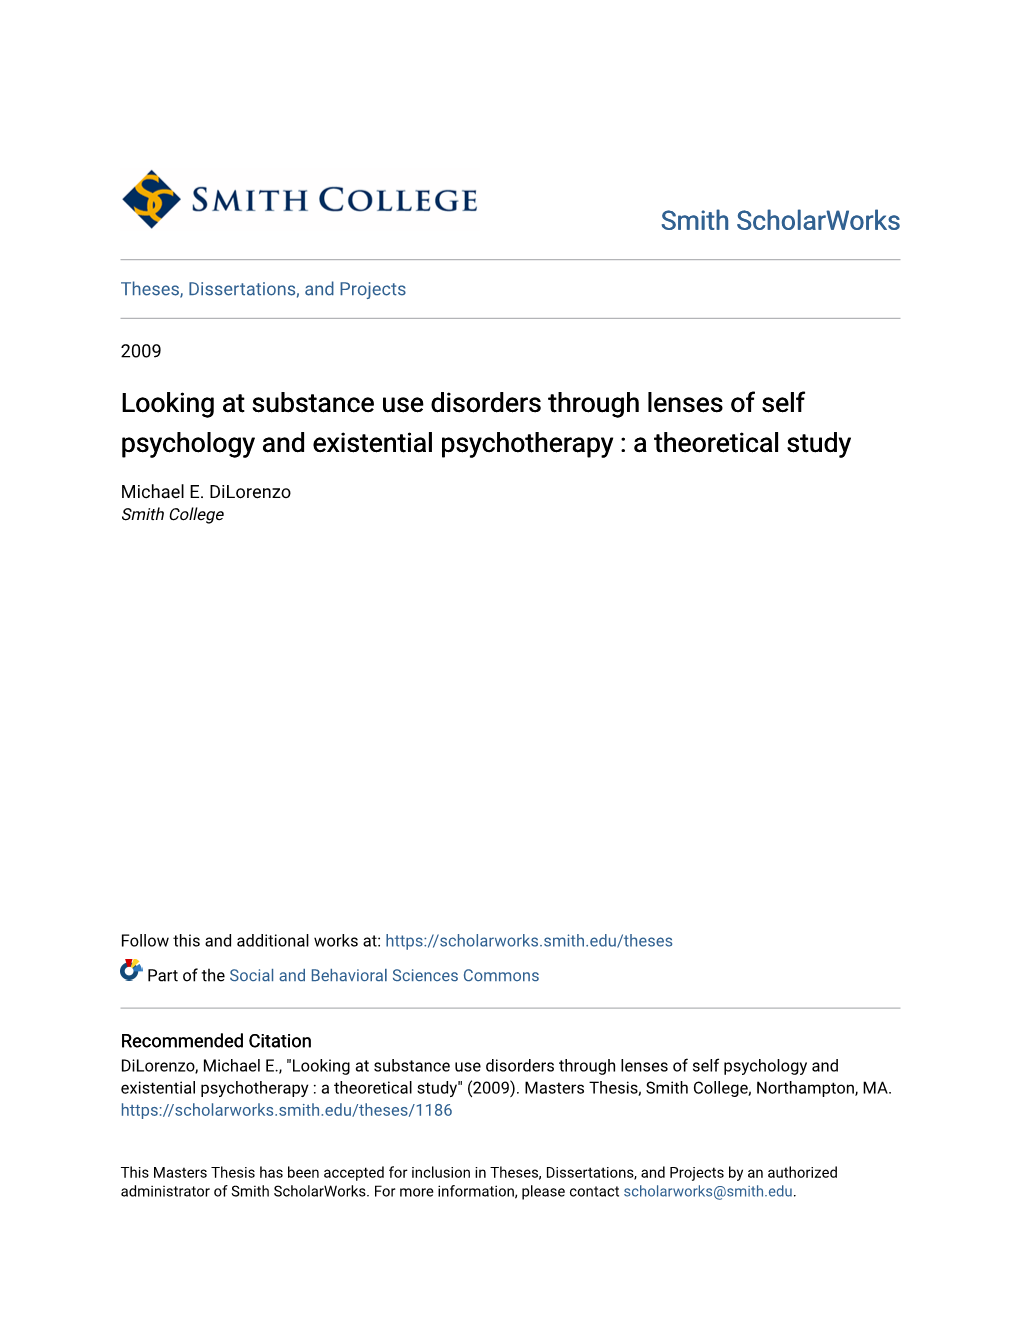 Looking at Substance Use Disorders Through Lenses of Self Psychology and Existential Psychotherapy : a Theoretical Study